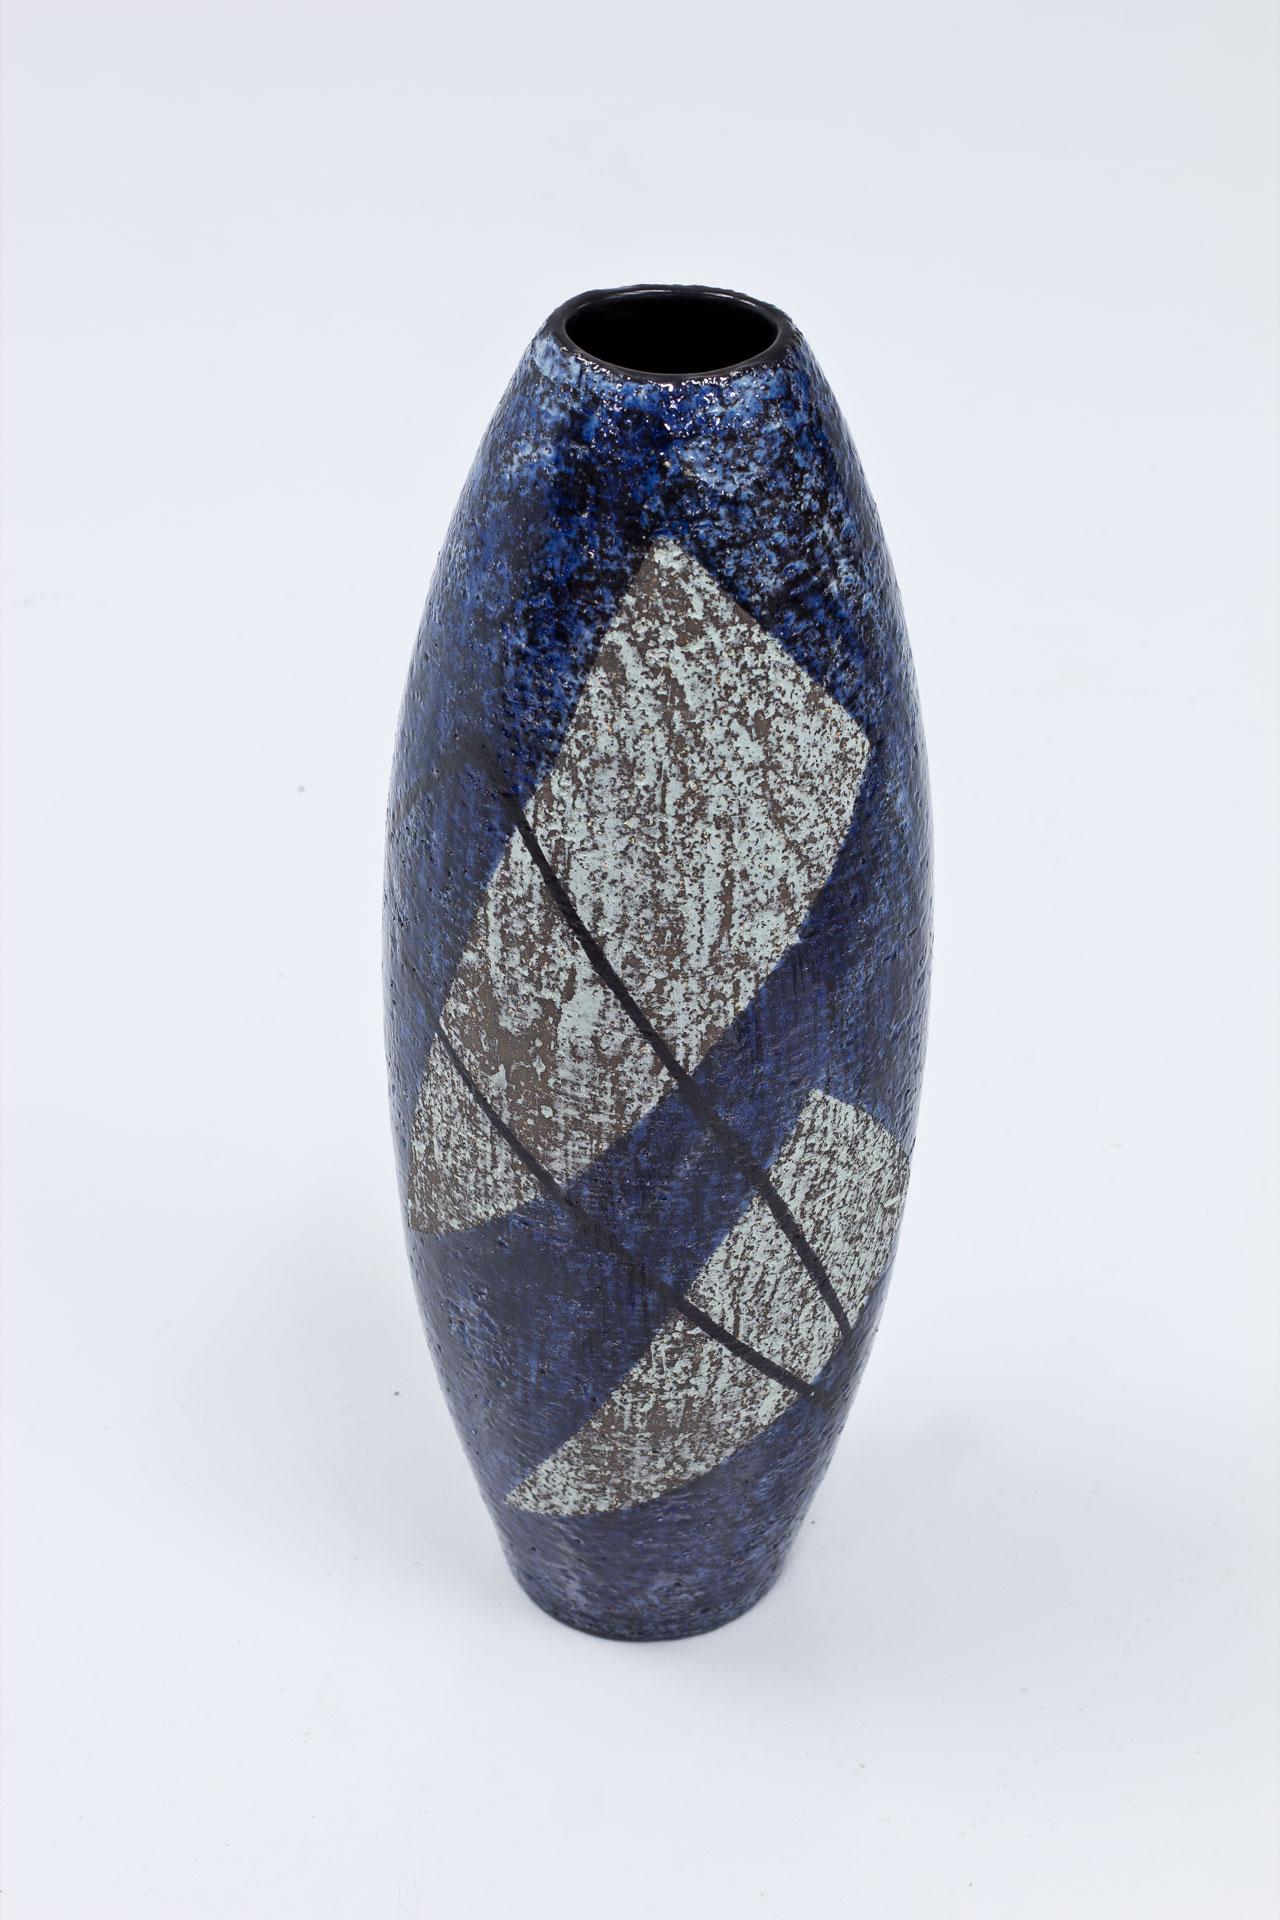 Stoneware floor vase designed by Ingrid Atterberg. 
Manufactured by Upsala-Ekeby in the city of Uppsala, Sweden during the 1950s. 
Rough surface with blue, light green and black glaze. Geometrical pattern.
Signed by the maker underneath.